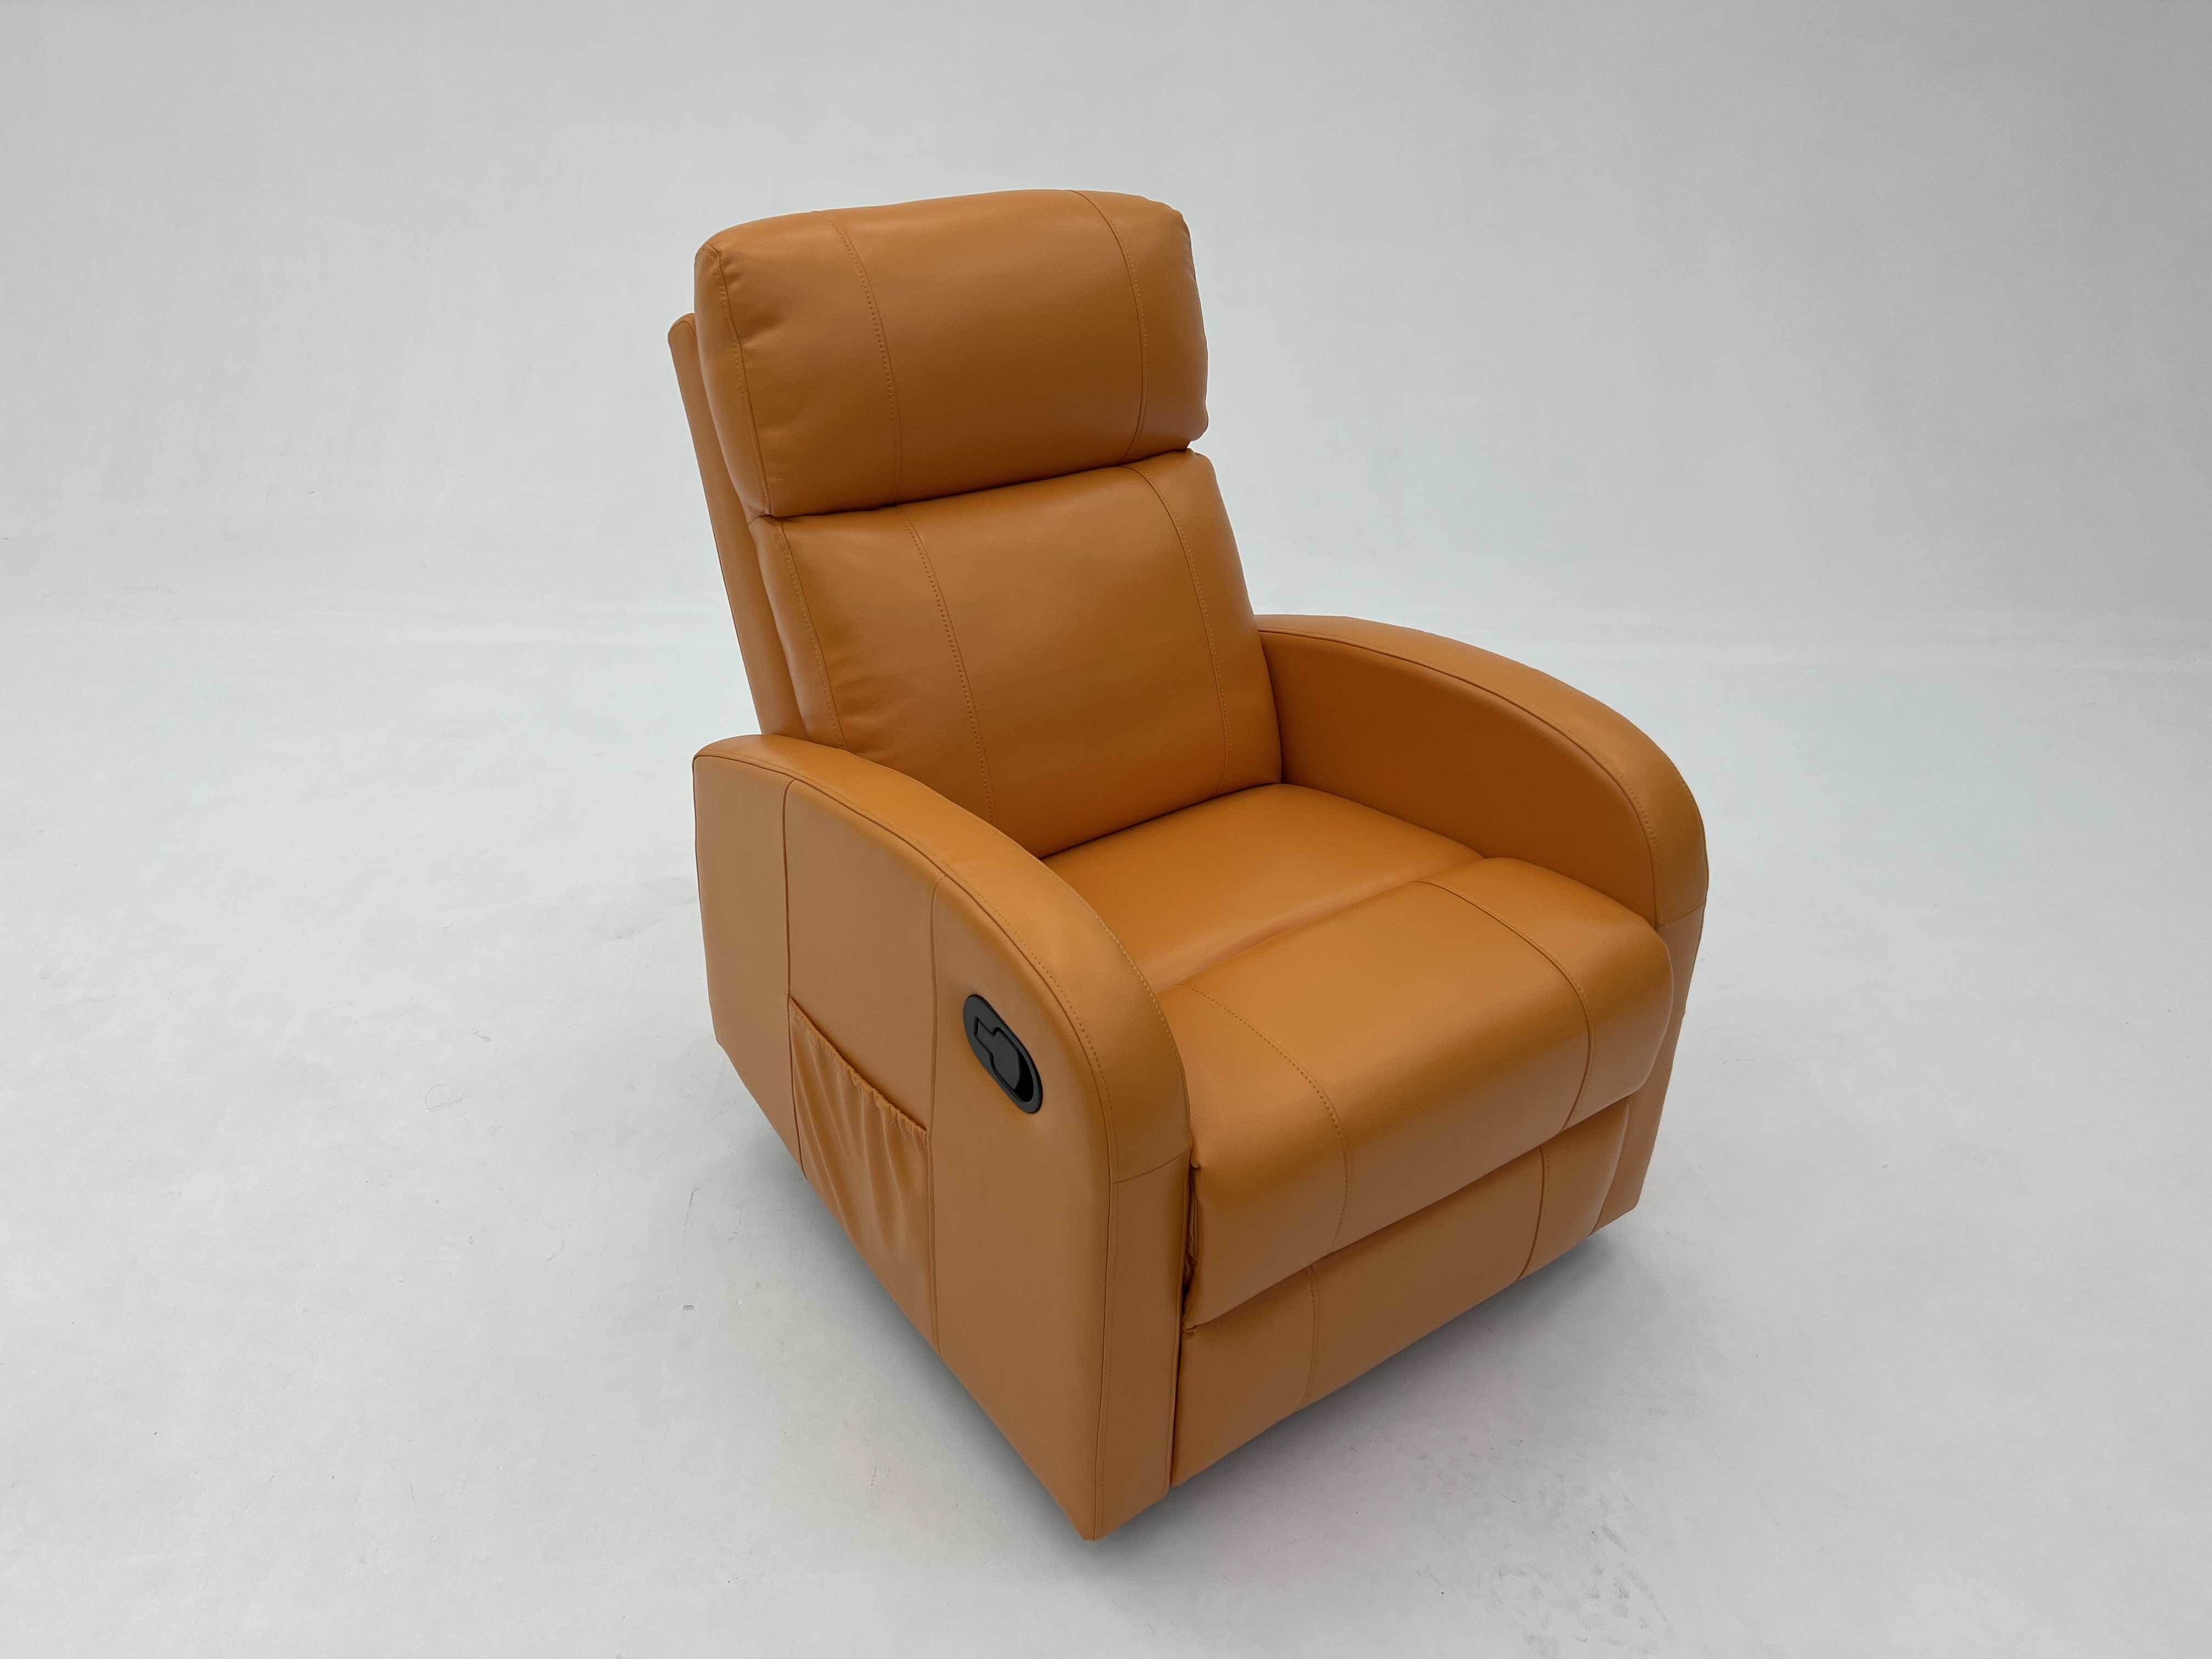 Top Selling Single Seat lounge Chair For Home